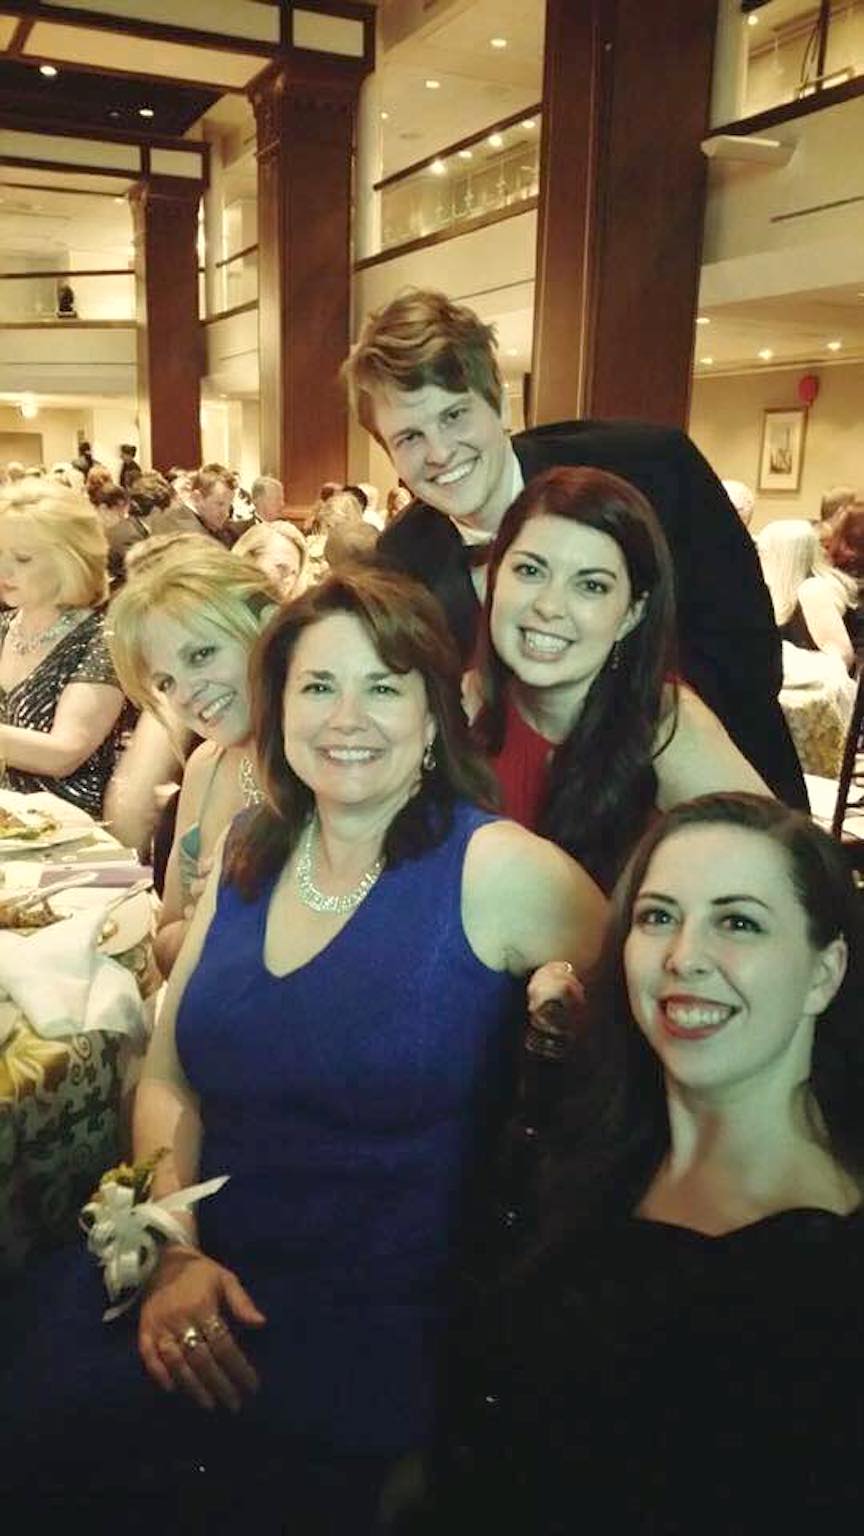 L-R: Diane Farrington Curtis, Riley Curtis, Savannah Peeples, Emma Peeples, and Shanna Peeples during the National Teacher of the Year Gala, Washington, D.C., April 2015. Shanna shares, “MY family was seated at the head table.” Photo courtesy of Shanna Peeples.